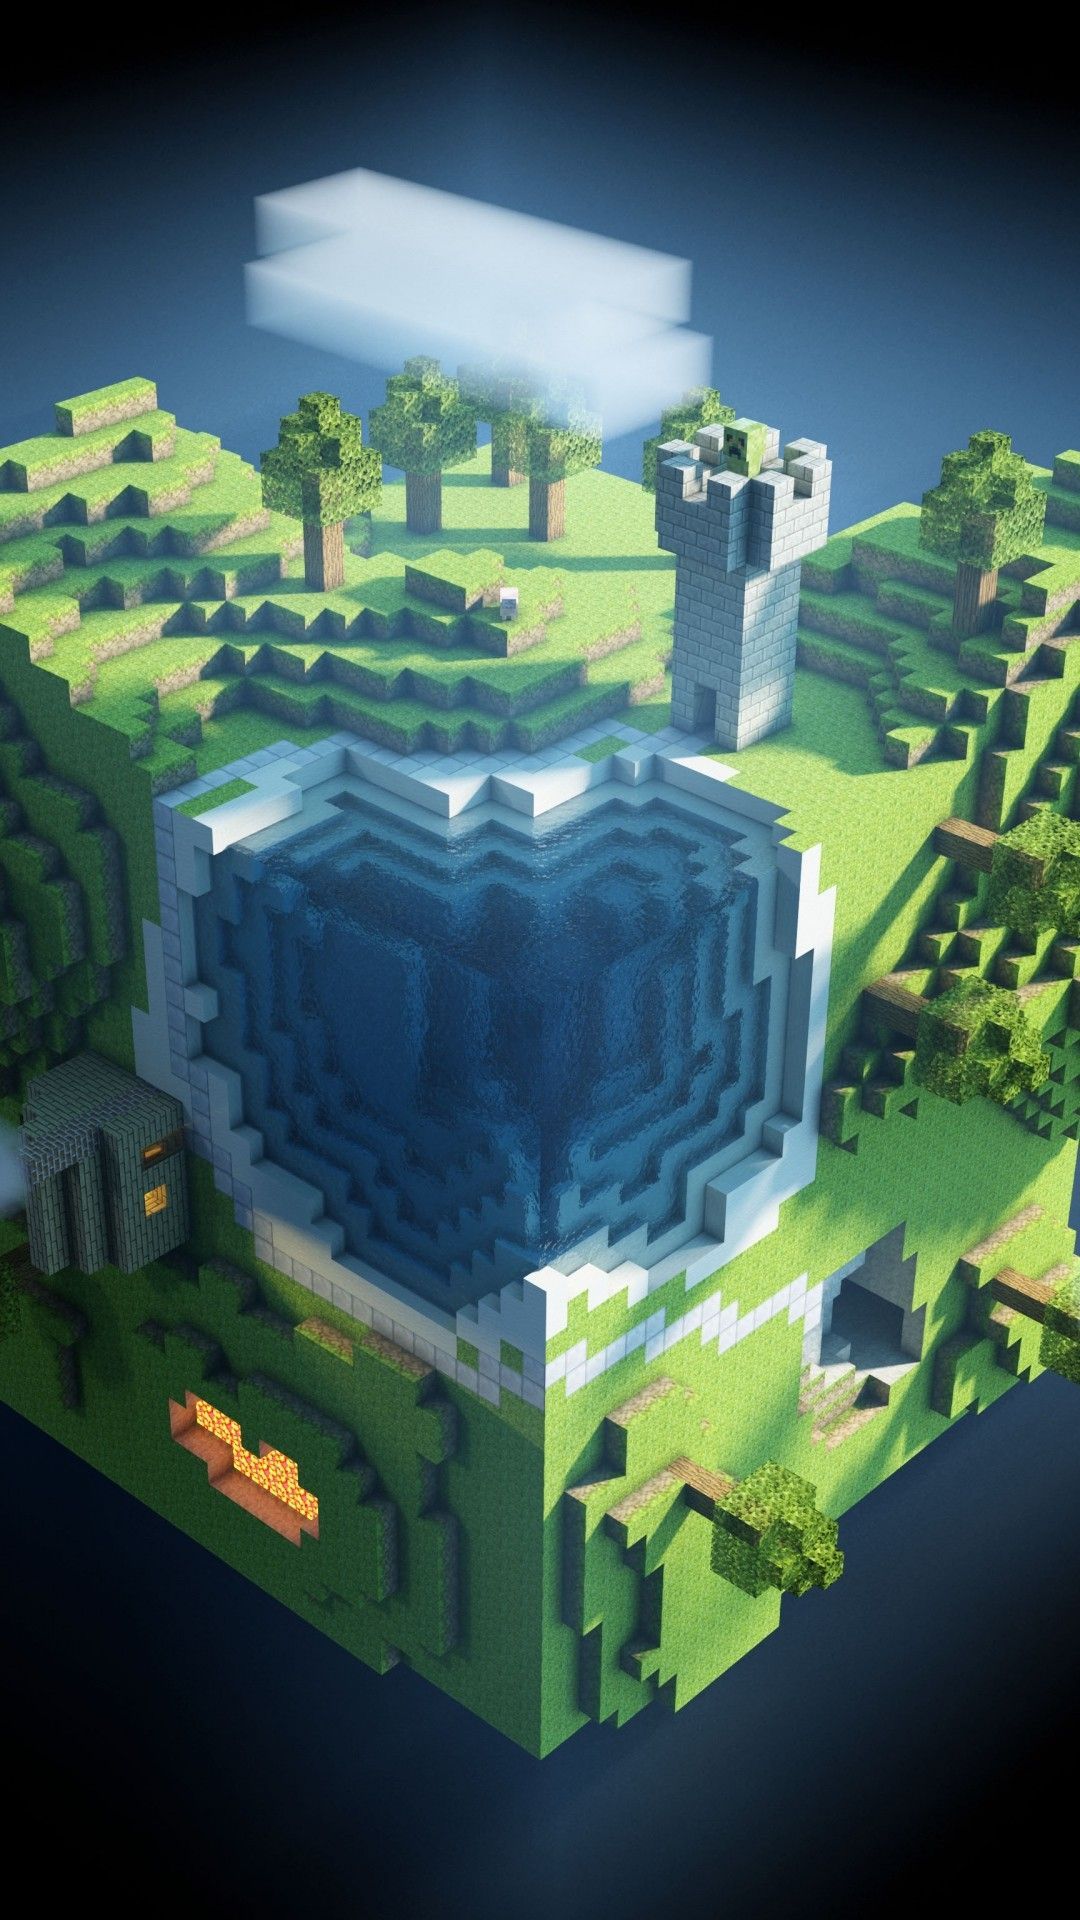 Minecraft Backgrounds » Hupages » Download Iphone Wallpapers